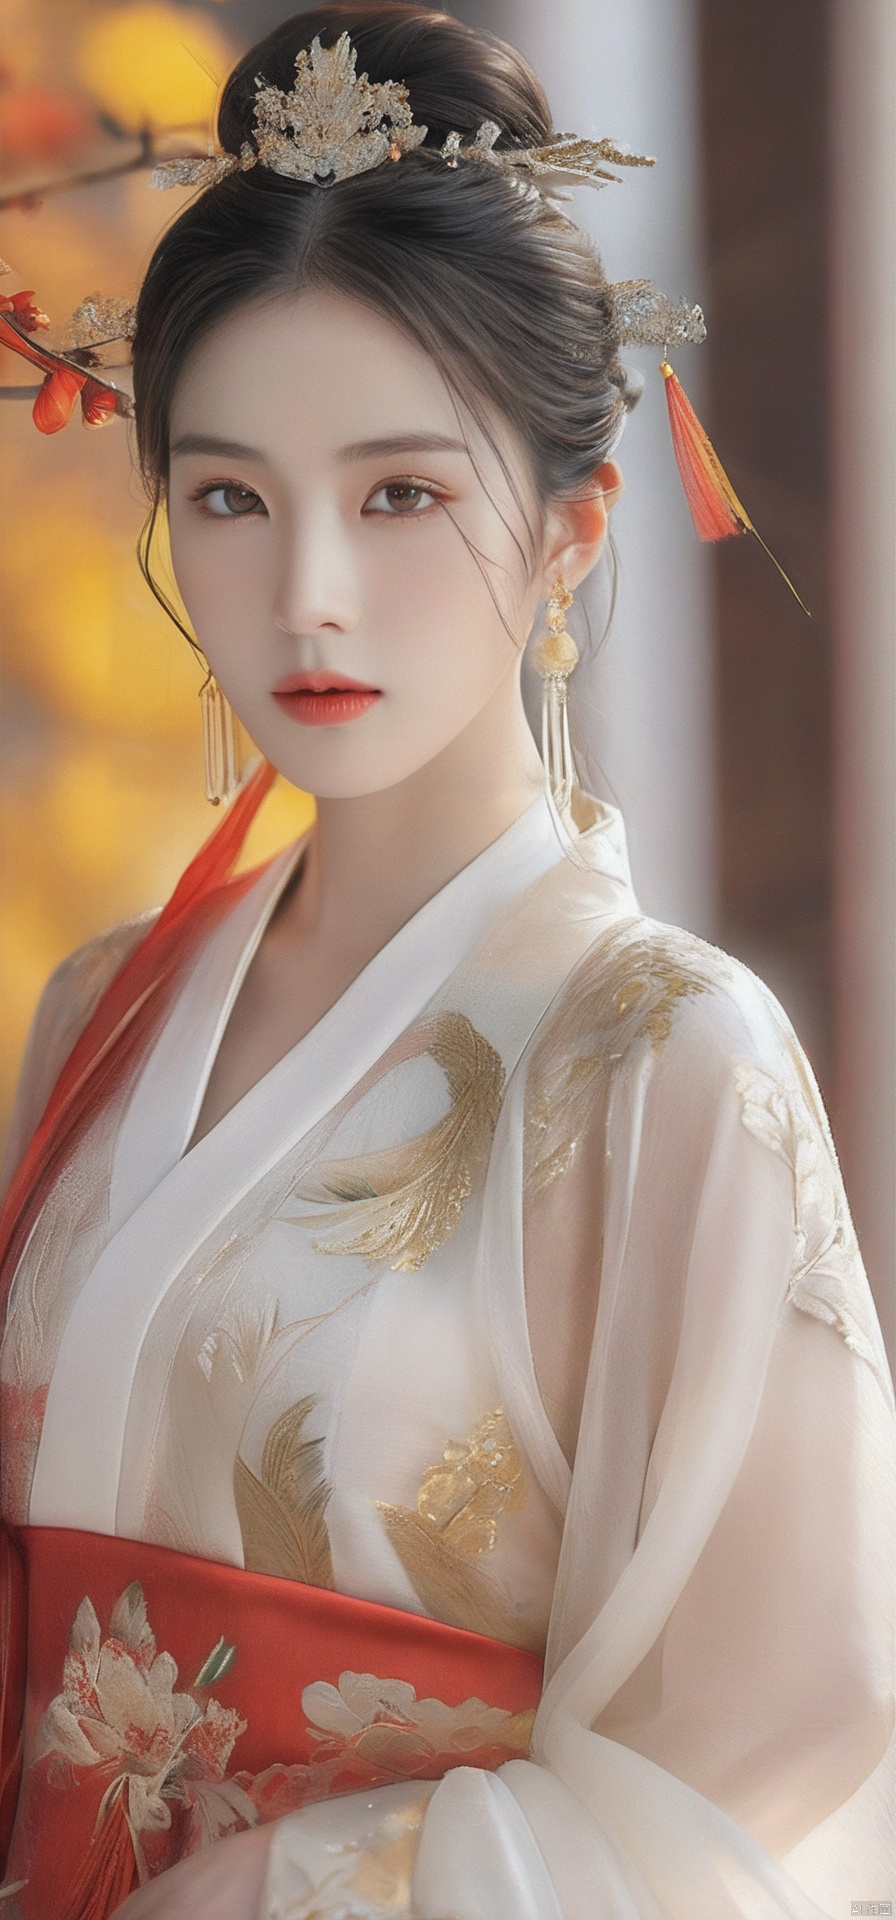 masterpiece,1girl,white dress,upper body,walking,looking at viewer, masterpiece,32k,extremely detailed CG unity 8k wallpaper, best quality, vibrant colors, break, china goddess, see through,1girl, long hair, black hair,dodger red see through clothes,gold dress,transparent shawl,1girl,red hanfu,earrings,best quality,masterpiece,RAW photo, detailed face, beautiful symmetrical face, cute natural makeup, sadness, feminine, highly detailed, oriental minimalism, subtle elegance, hd , in the style of elegant clothing, realistic yet ethereal, simplistic designs, oriental, whimsical shapes, serene harmony beautiful symmetrical face, elegant, feminine, highly detailed, intricate,best quality, ultra-detailed, masterpiece, hires, 8k,(photorealistic),transparent,skin white and smooth,transparent shawl,high heels,